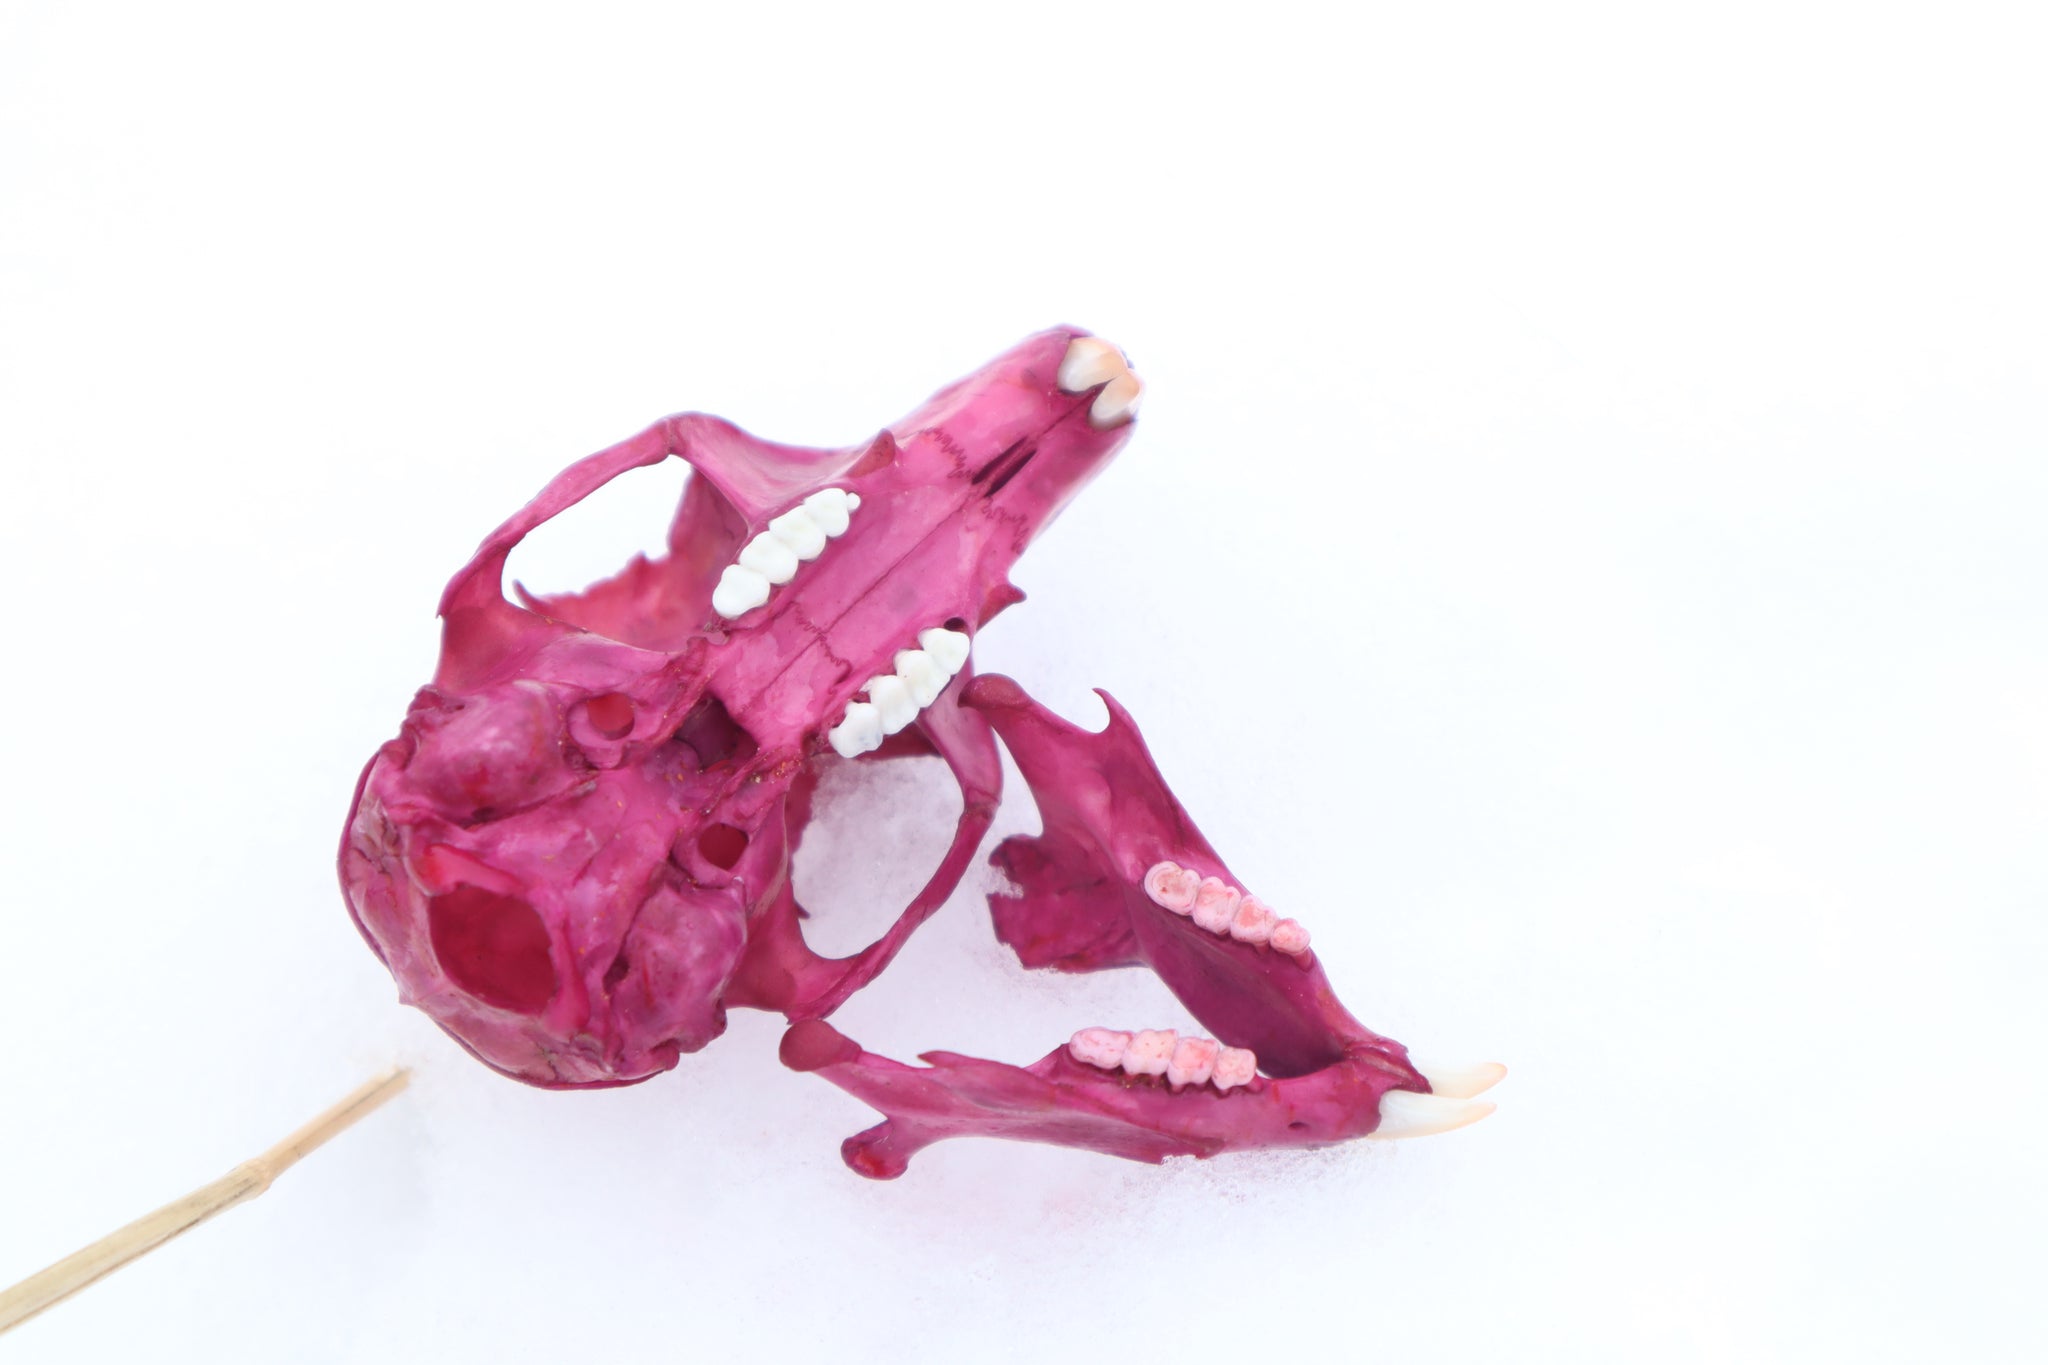 Naturally Stained Eastern Gray Squirrel Skull